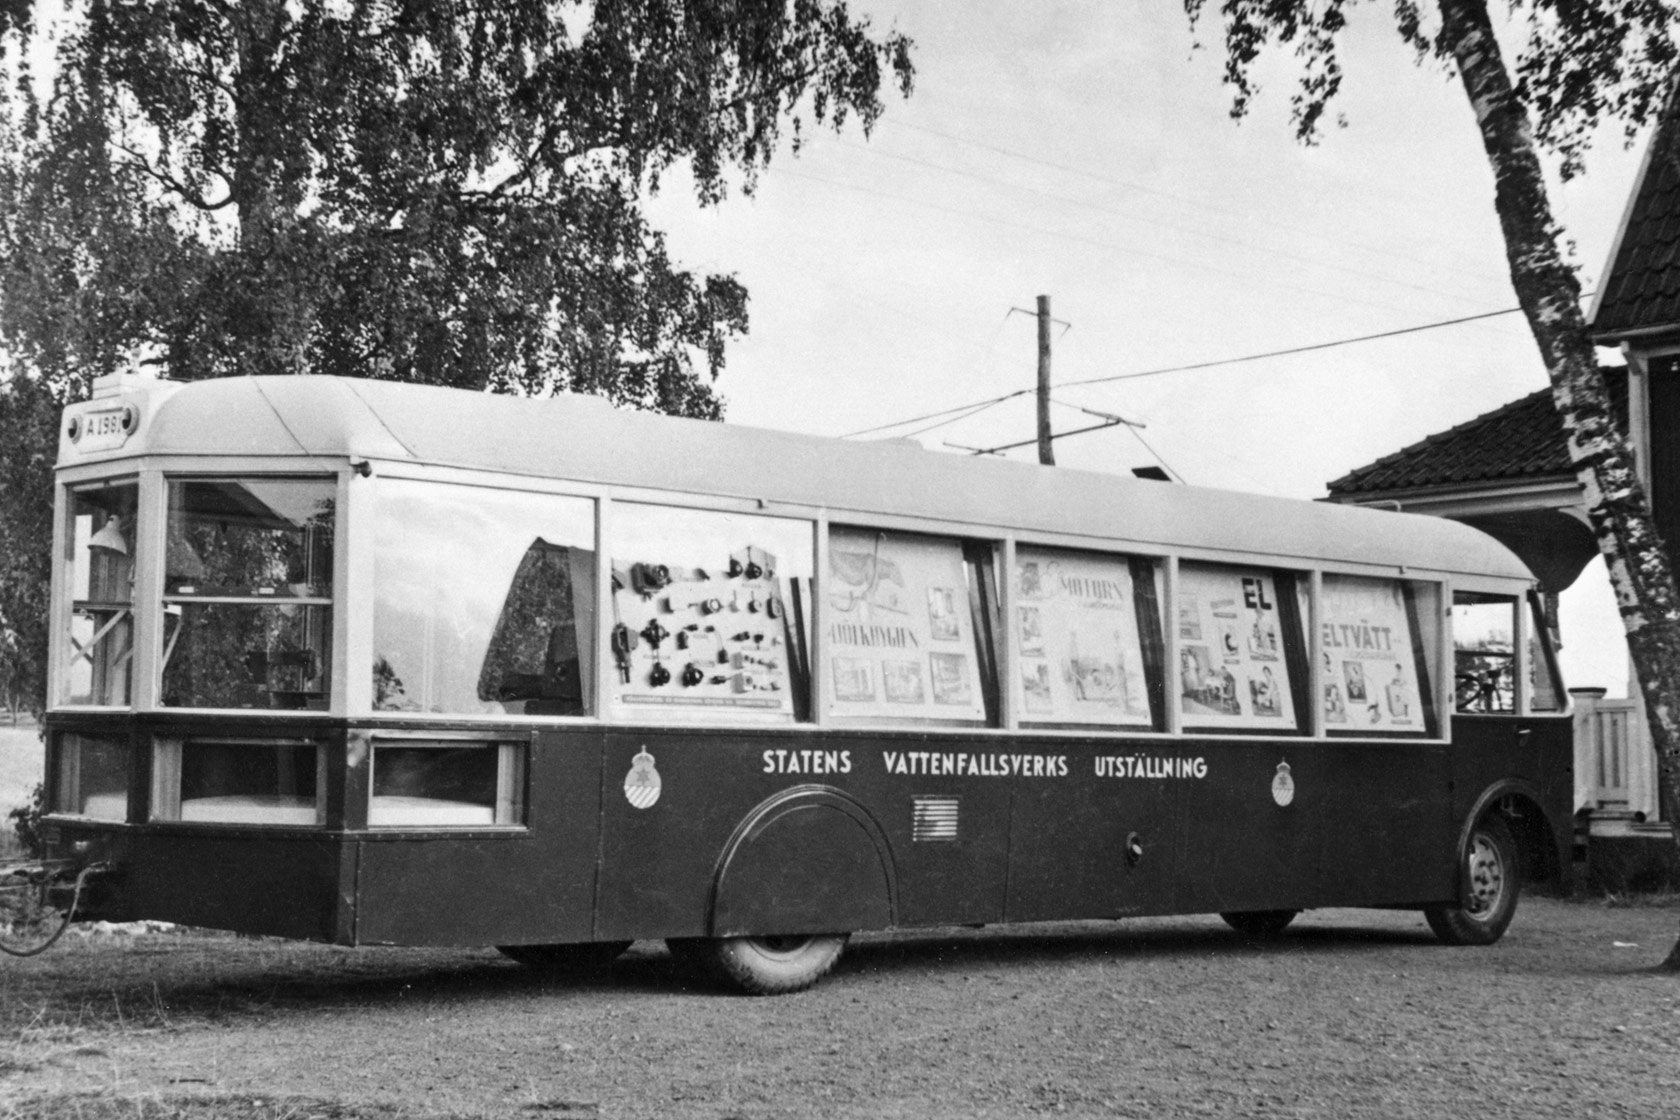 Demonstration bus, used to promote electricity in the 30s and 40s